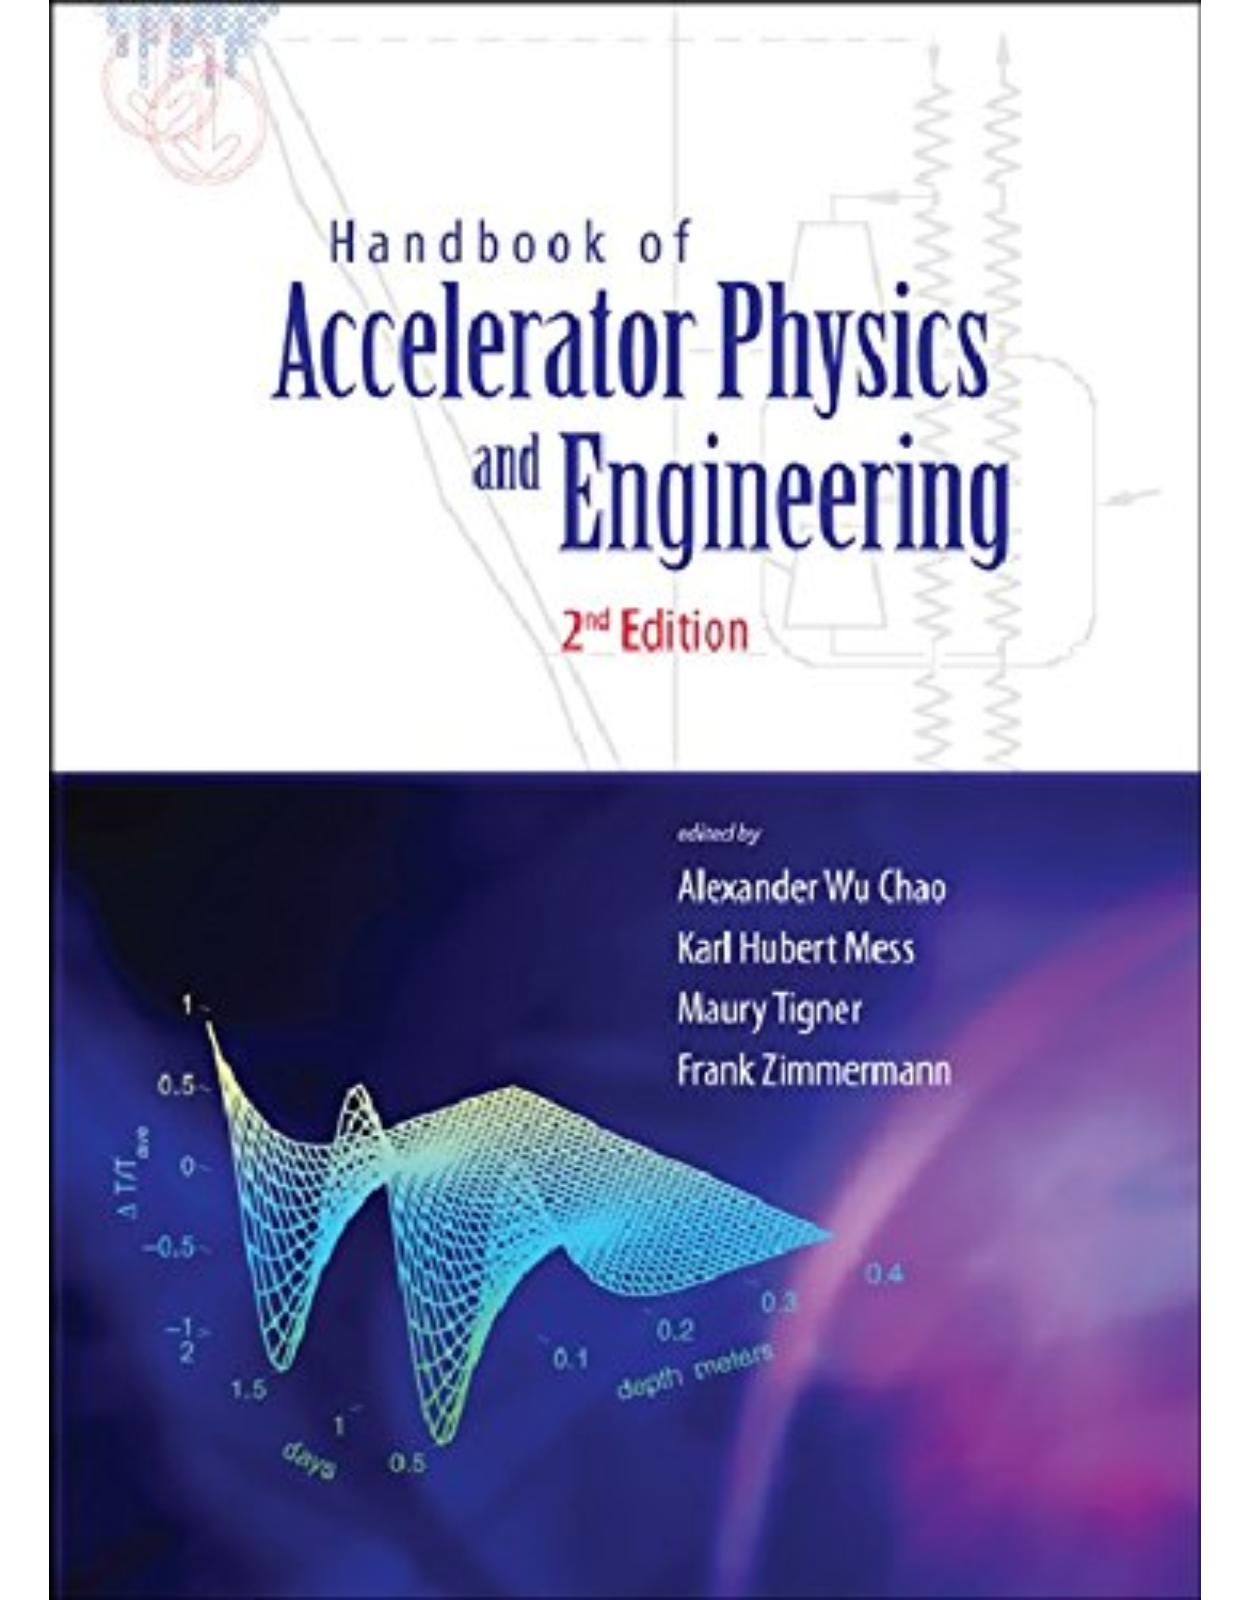 Handbook of Accelerator Physics and Engineering: 2nd Edition